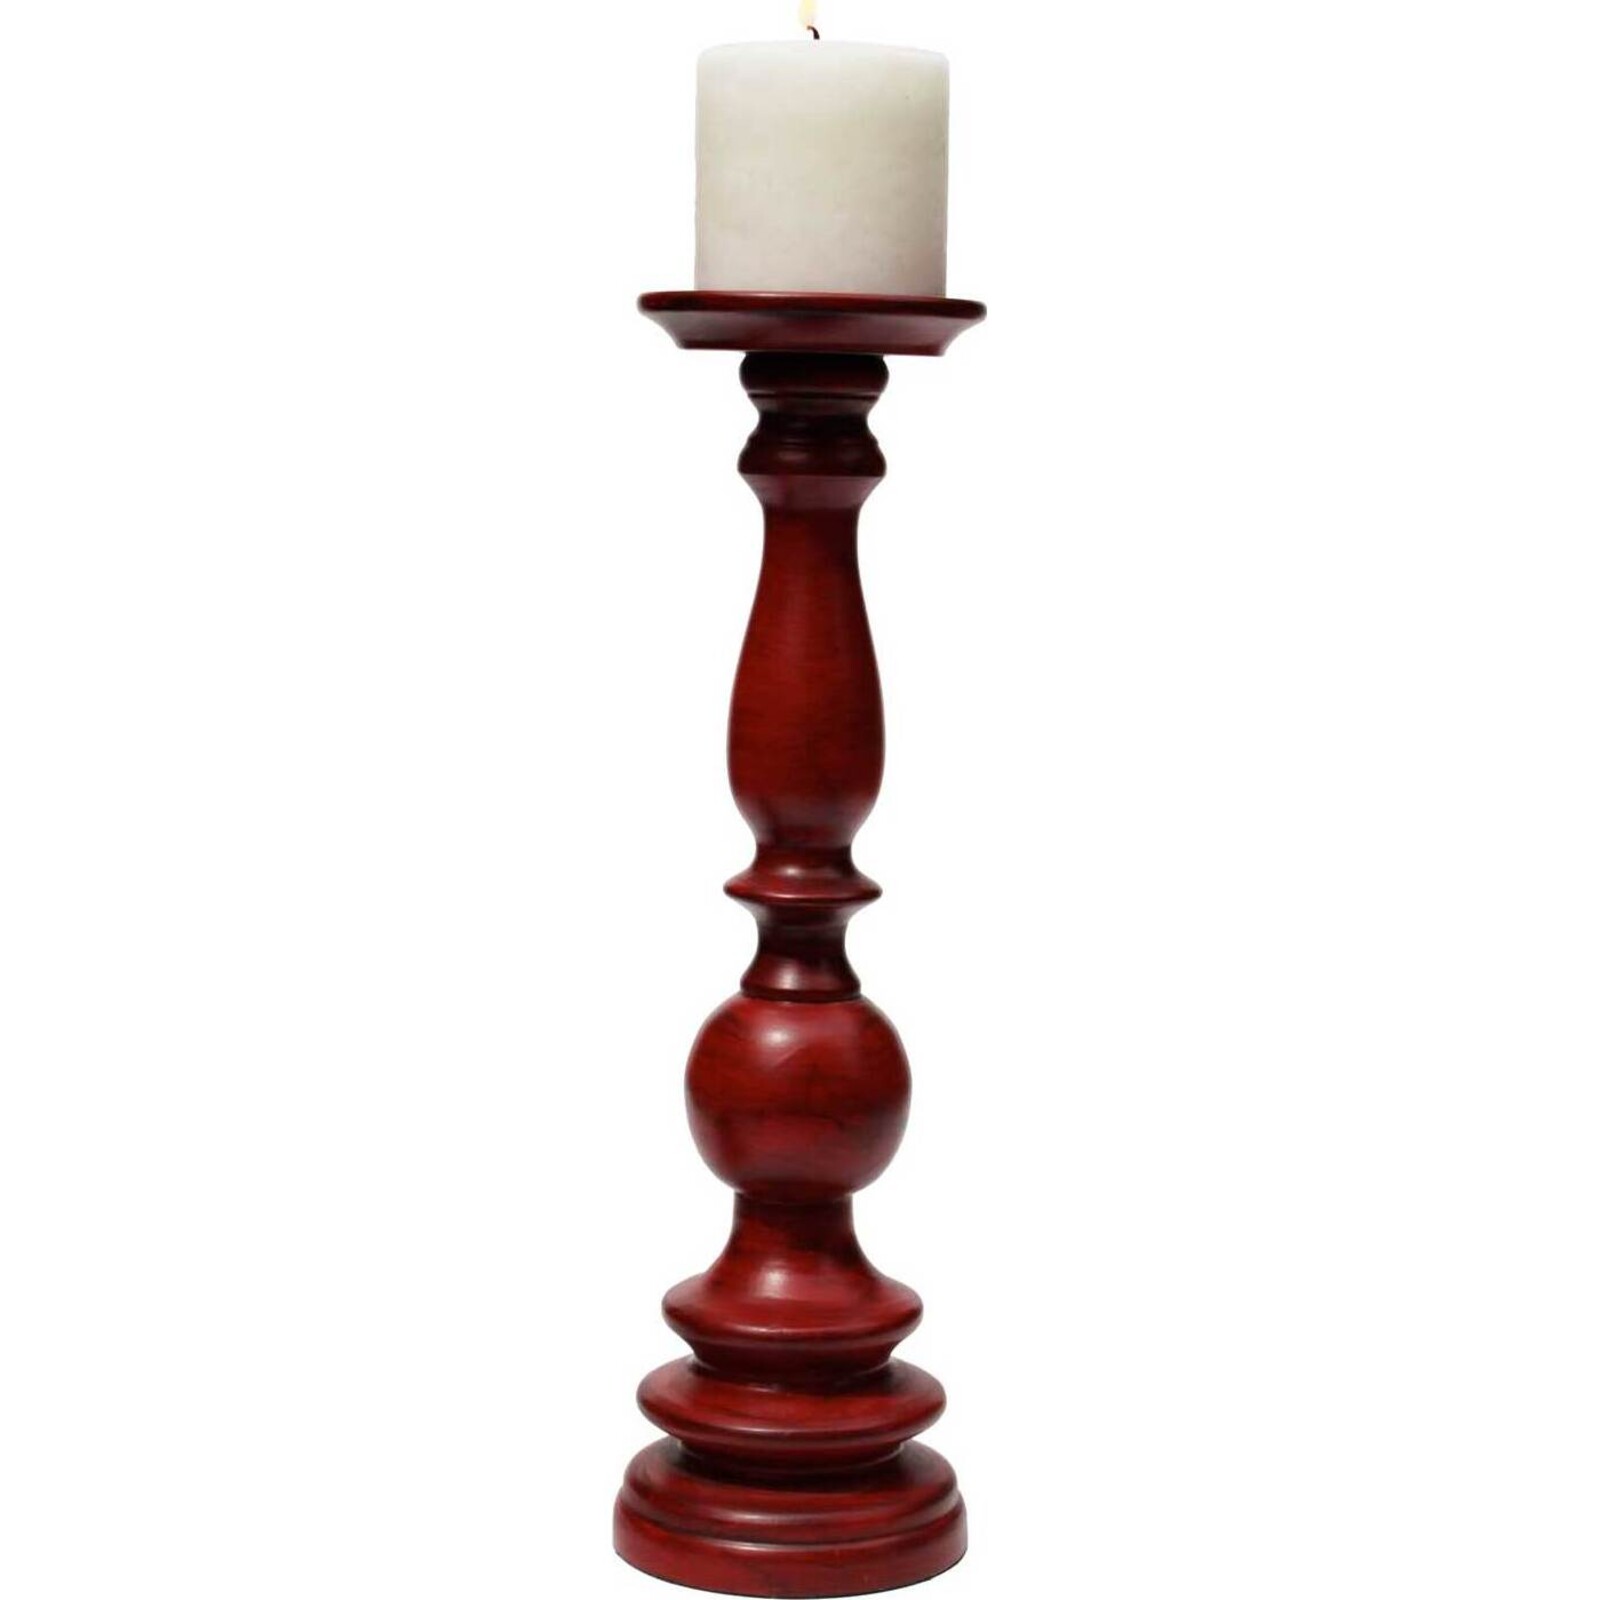 Candlestick - Rustic Red Large